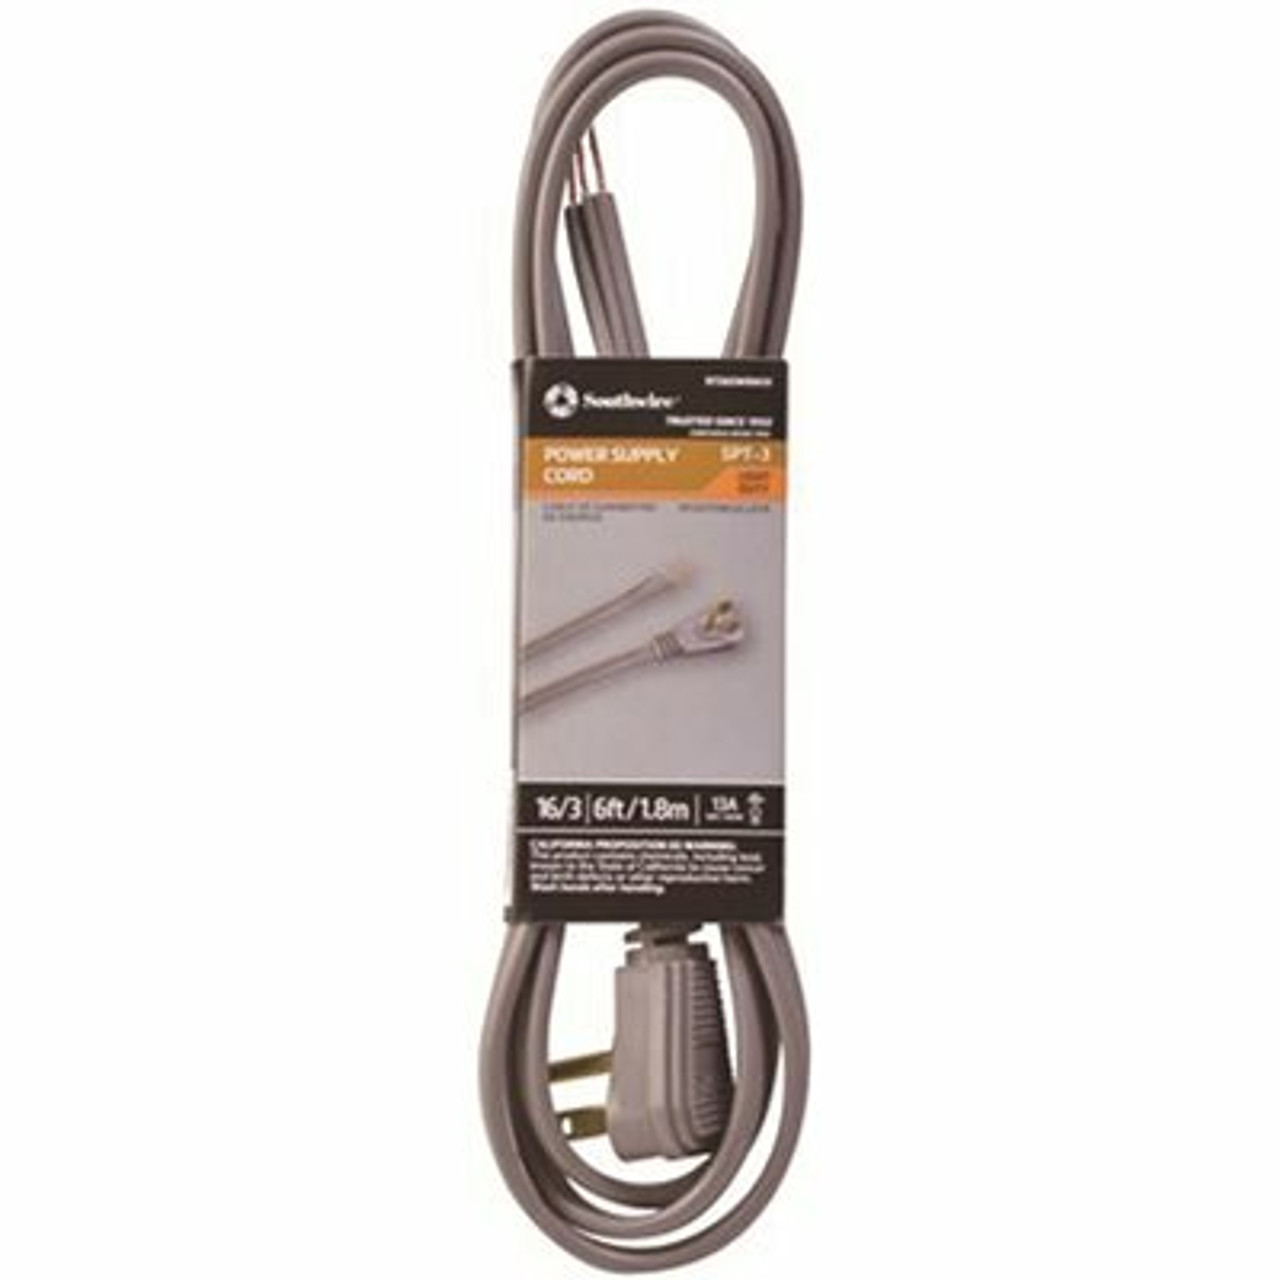 Southwire Flat Garbage Disposal Cord With Right Angle Plug, Spt-3, 16/3, 6 Ft.